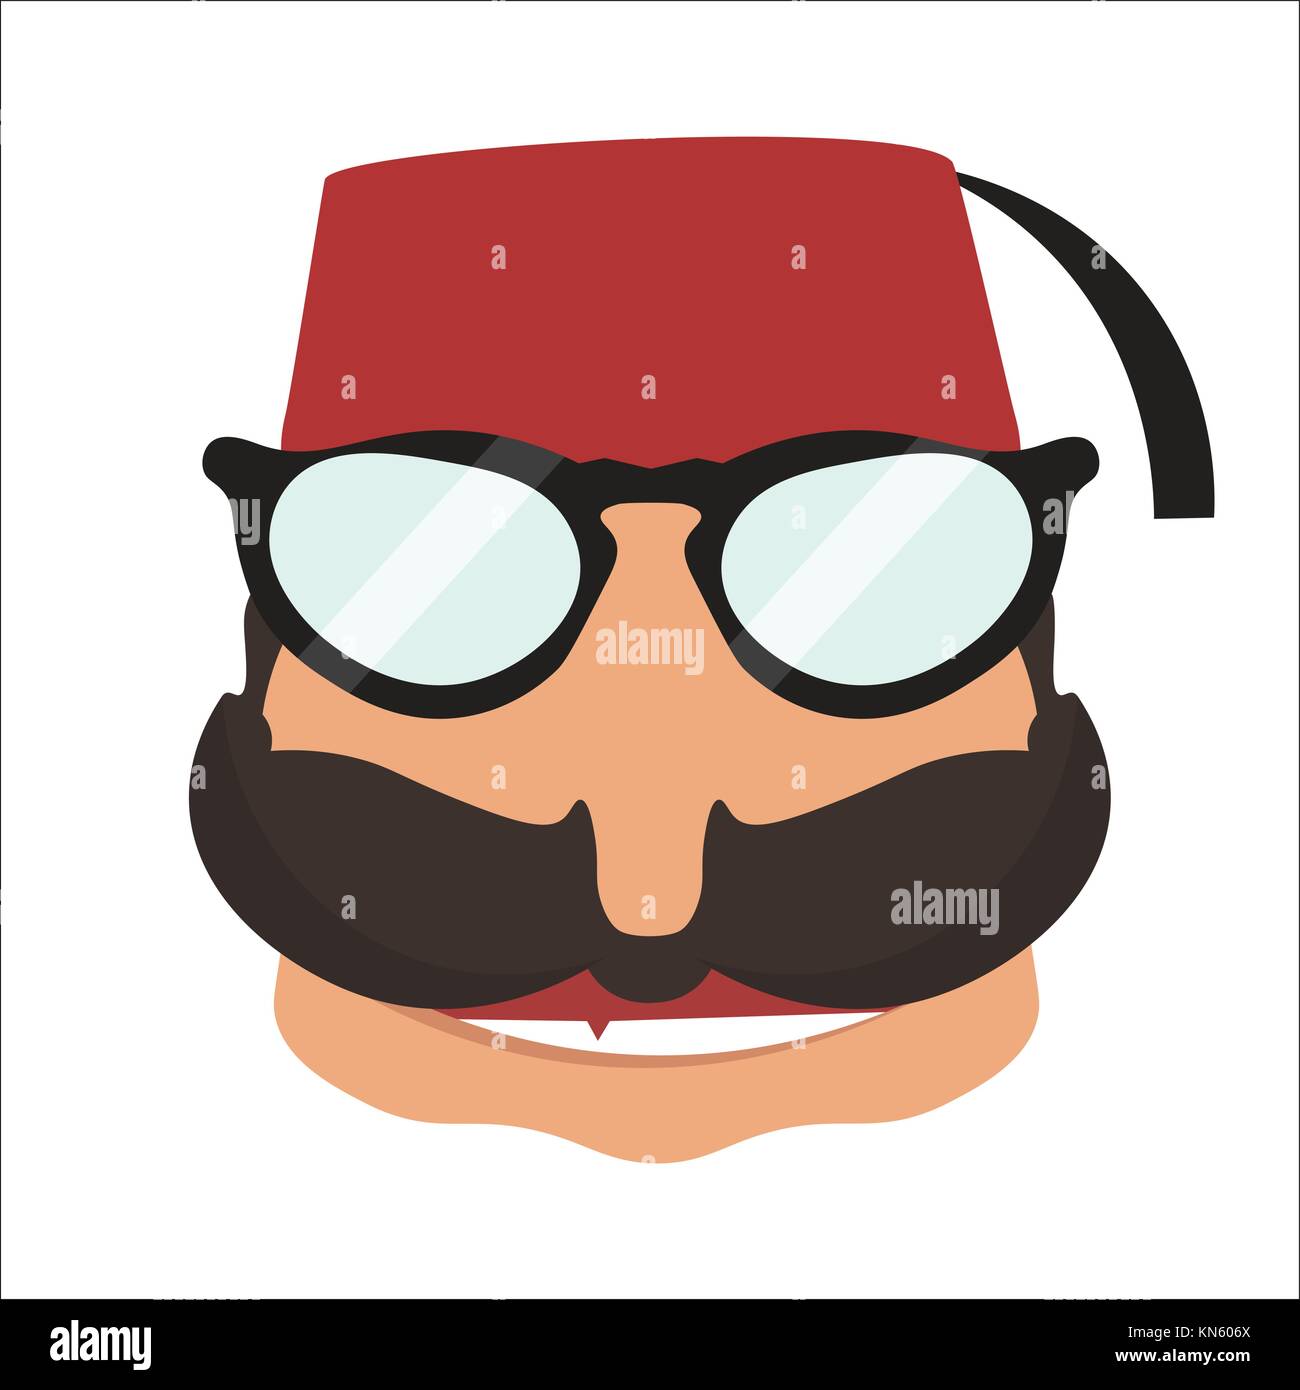 Turkish man in sunglasses icon in flat style isolated on white background. Stock Vector